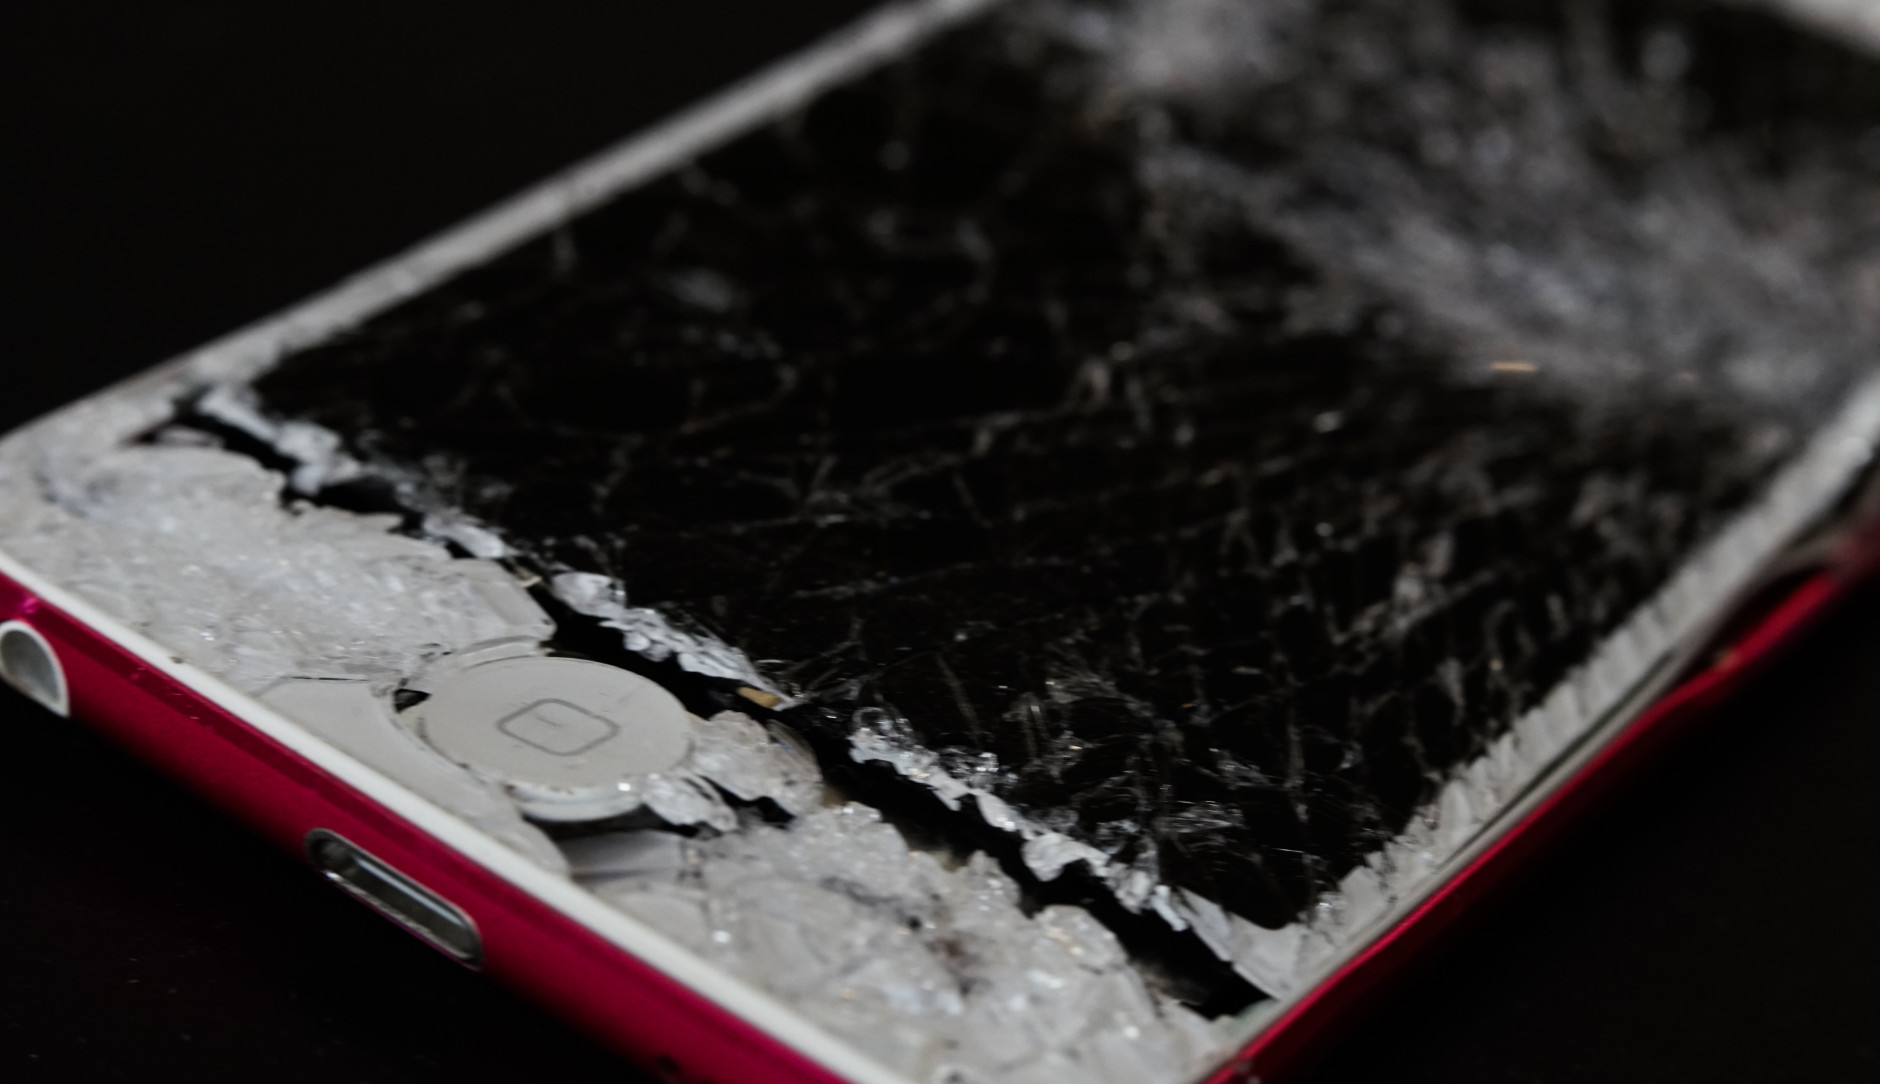 A smartphone with a smashed screen.